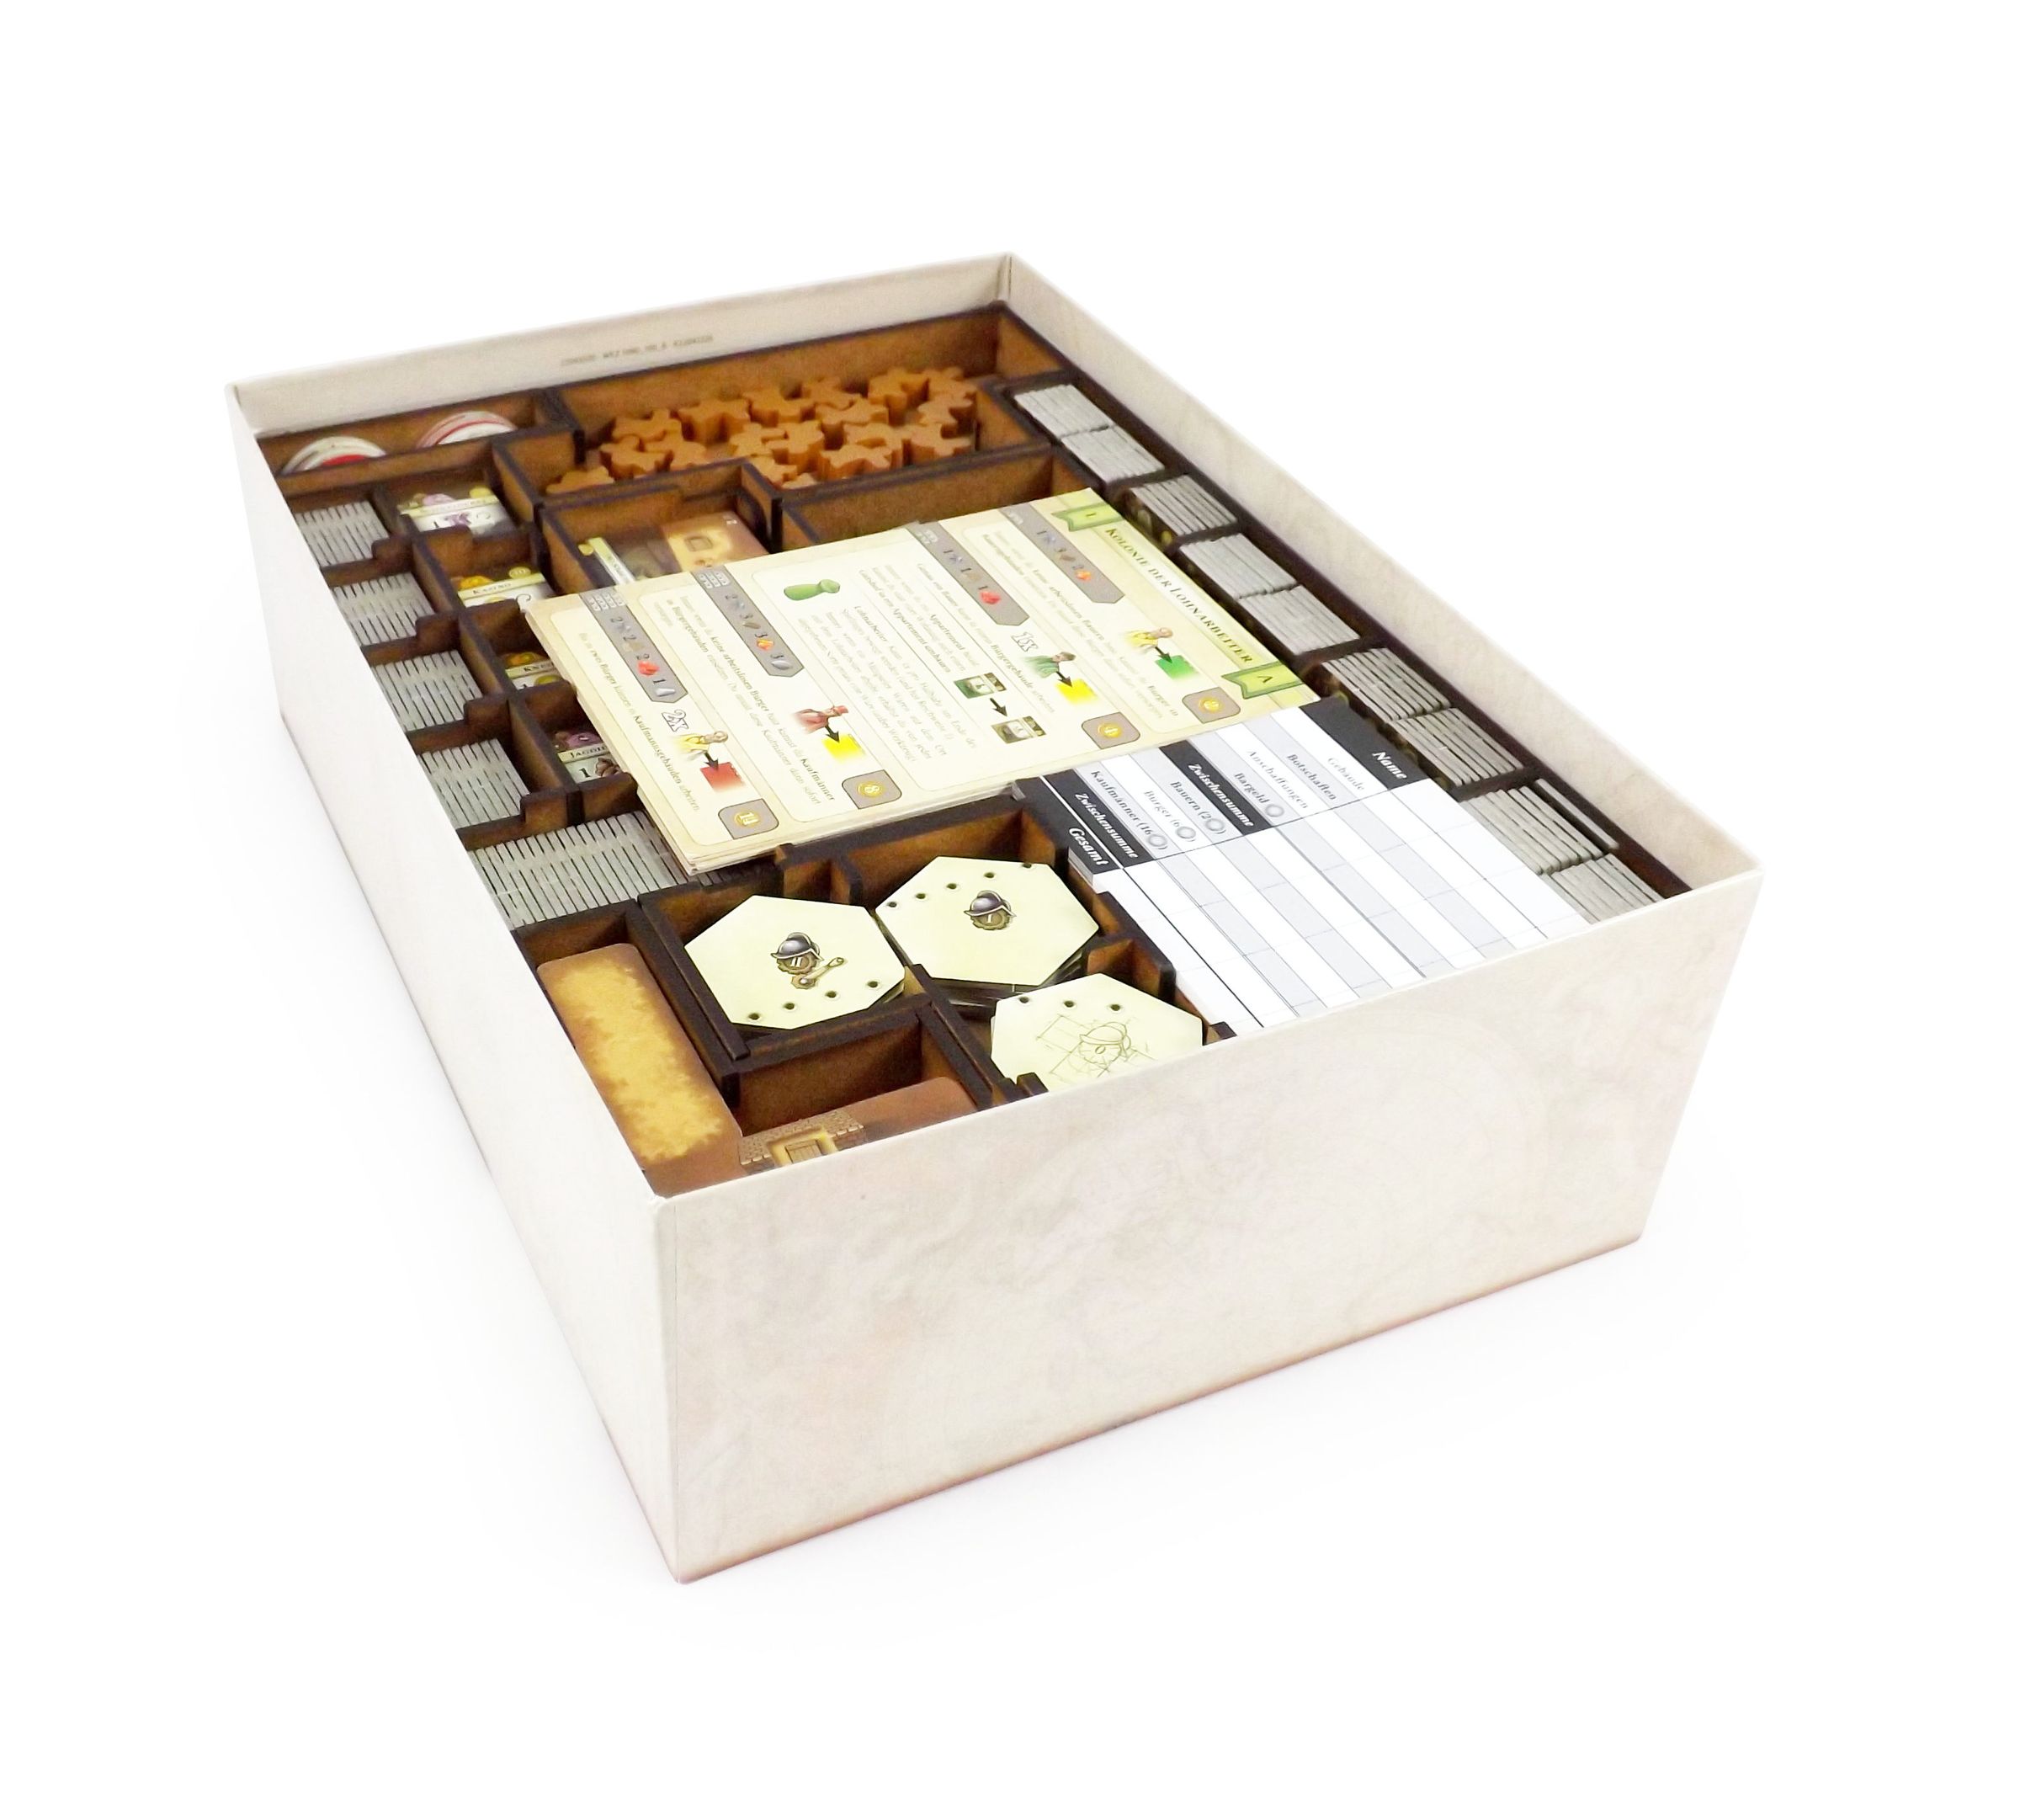 Boardgame Organizer for The Colonists and expansion Ante Portas